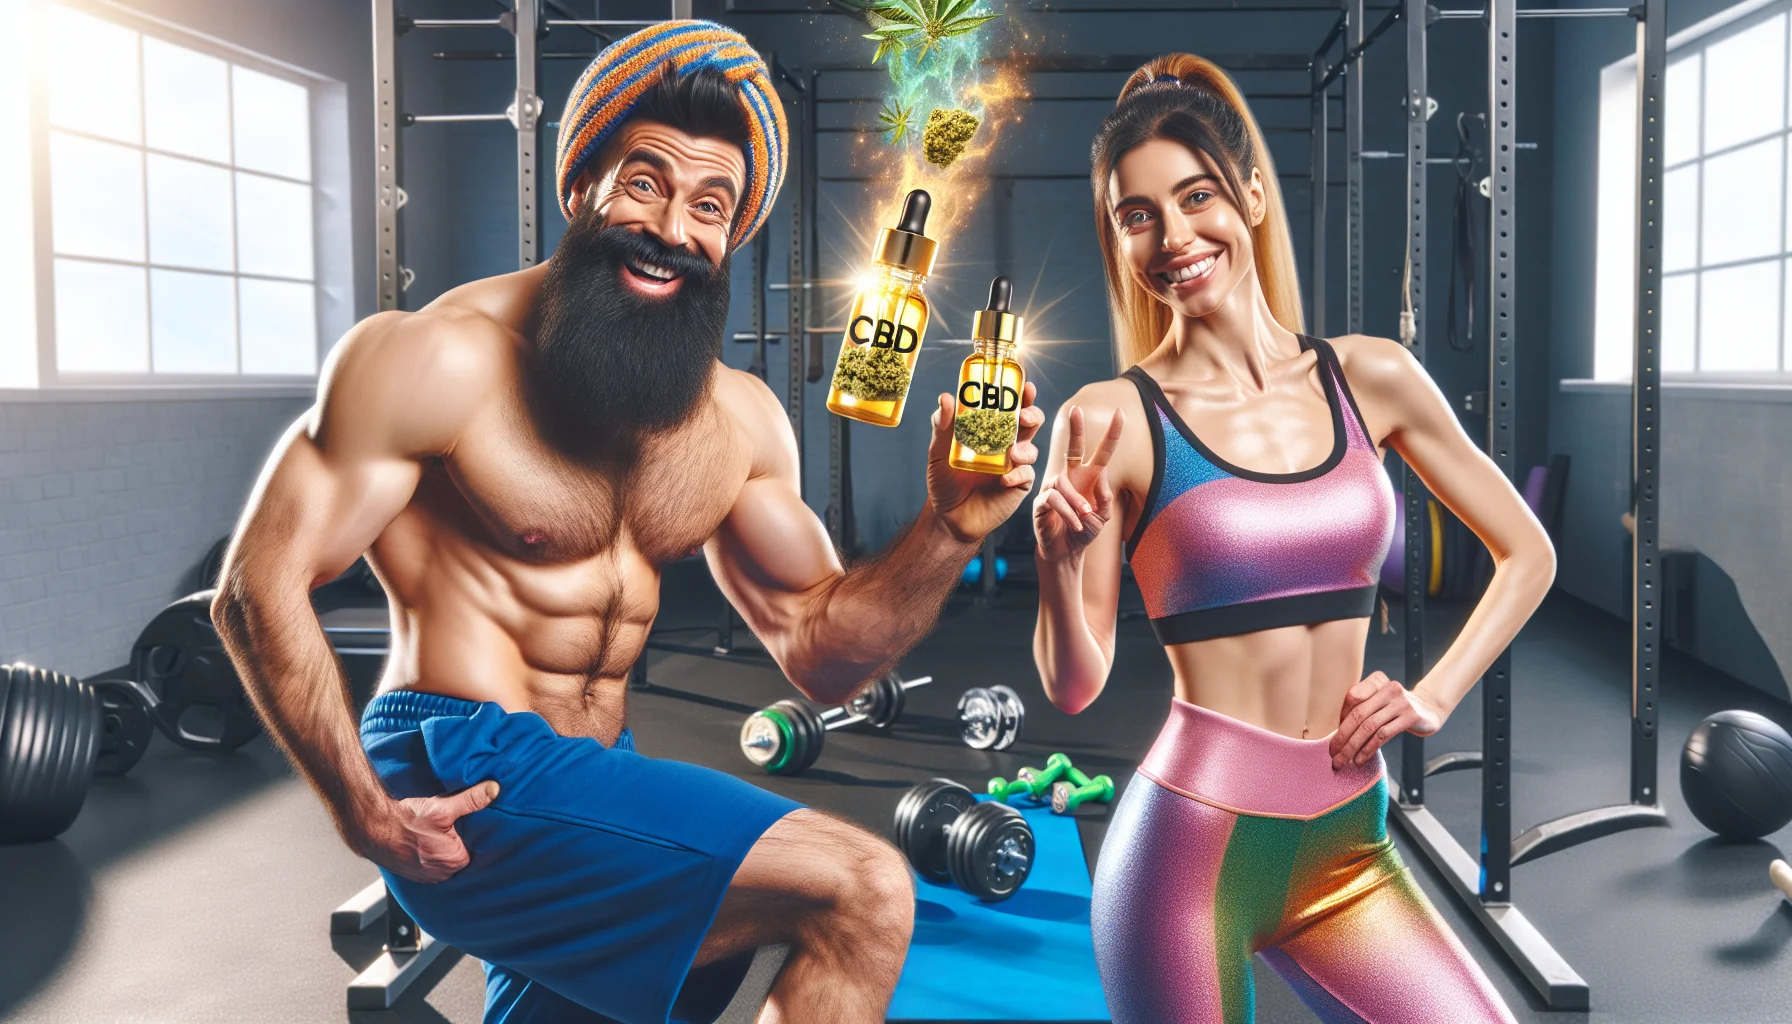 Create an amusing yet realistic image that showcases the benefits of CBD oil for fitness enthusiasts. Our visual includes a post-workout scene with a cheerful Middle-Eastern bearded man in his 30s and a Caucasian woman in her 20s, both in colorful sportswear. They are holding bottles of CBD oil with a glowing aura, symbolizing its benefits. Their smiles are bright and their bodies look fit and healthy, hinting at their rewarding fitness journey with the help of CBD oil. The background has taken a hilarious twist, with gym equipment such as weights, treadmill, and yoga mats playfully arranged in unexpected positions, adding to the overall funny scenario.